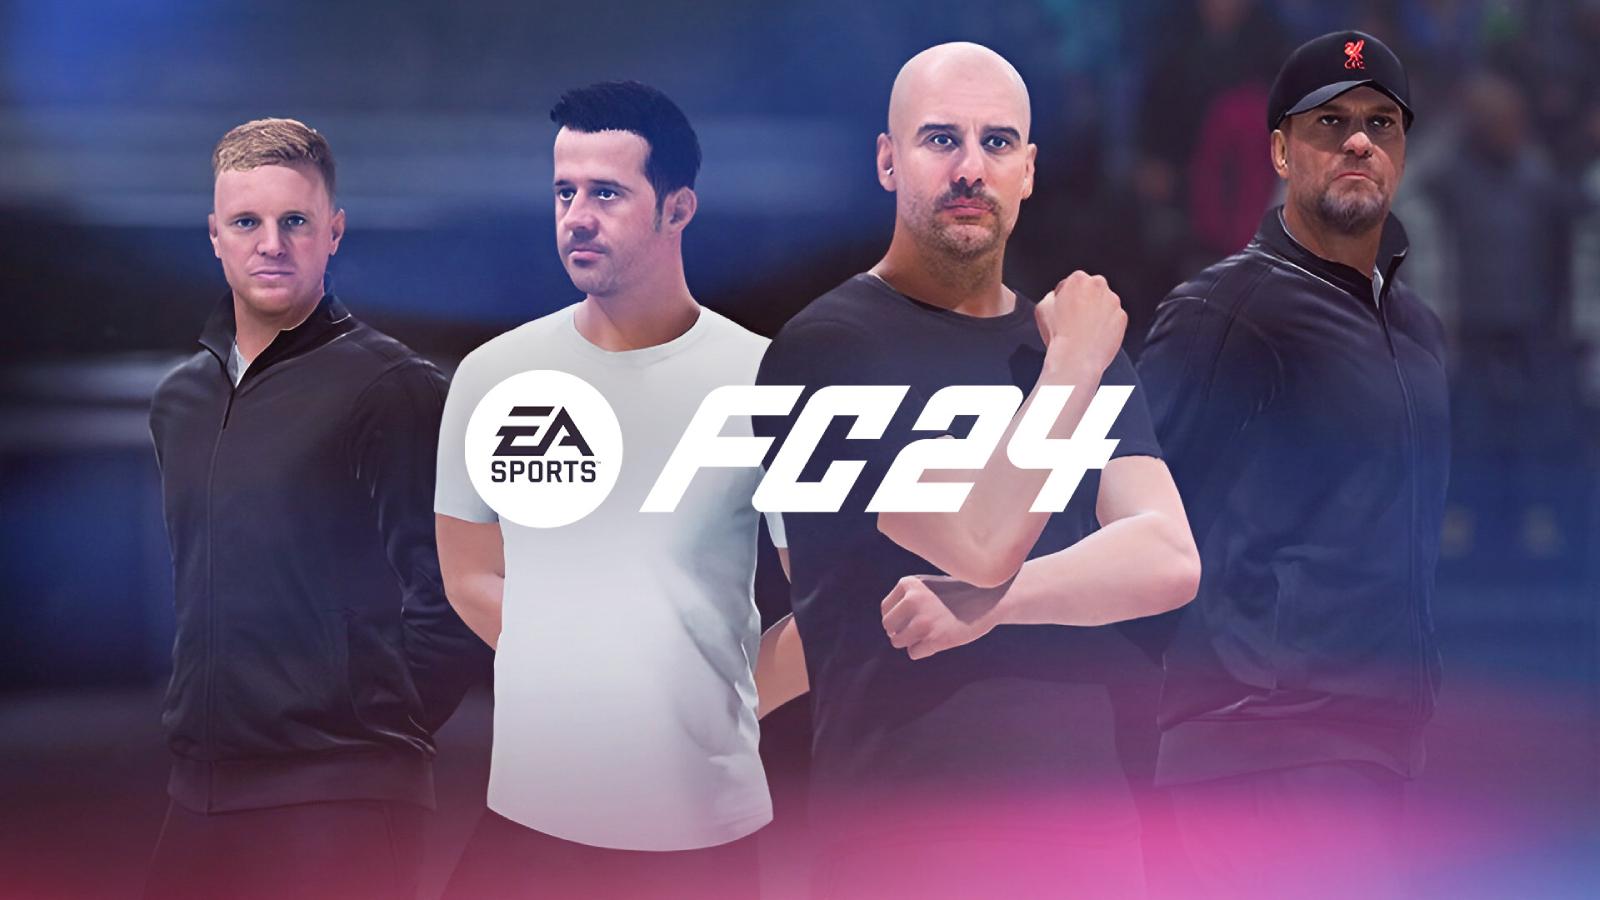 EA FC 24 Holiday update: 100 player changes, gameplay nerfs, more - Dexerto